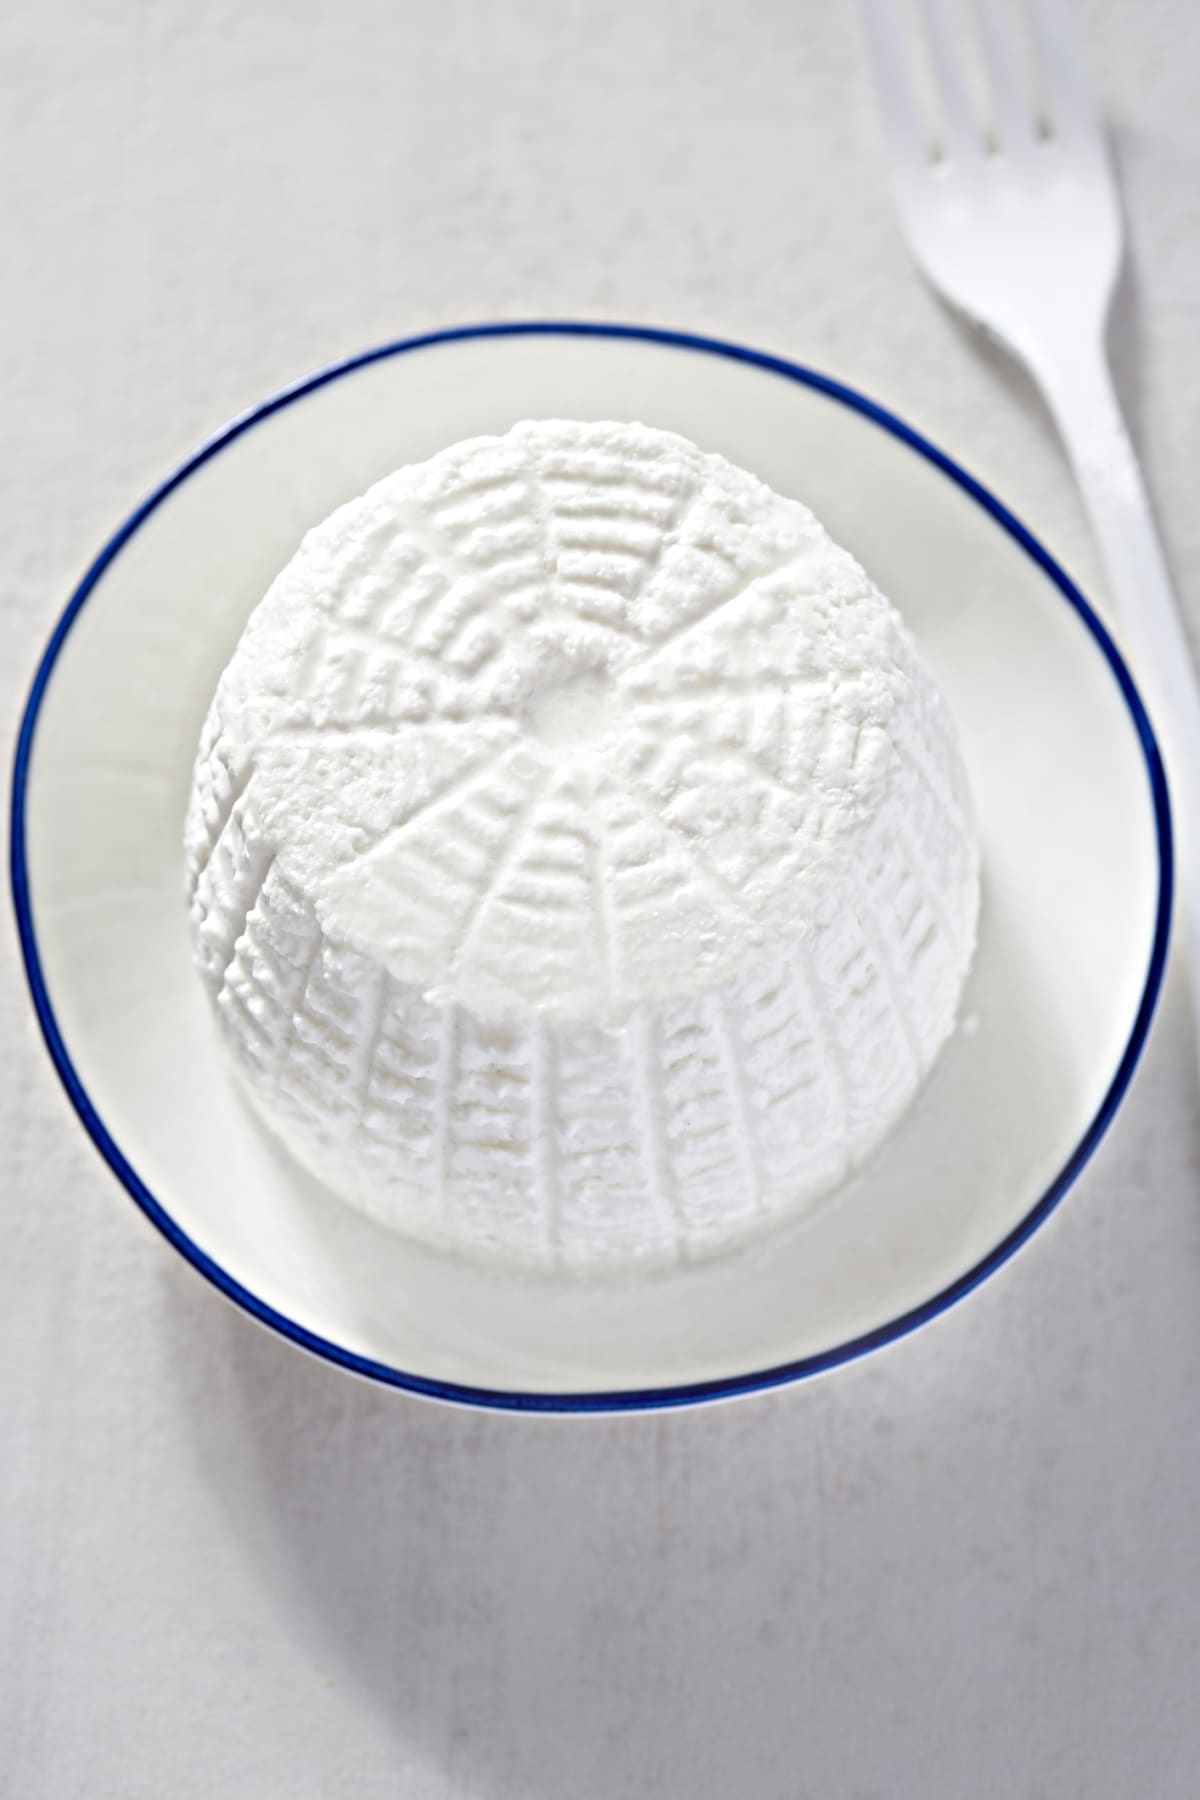 Ricotta cheese on white plate with blue rim next to fork